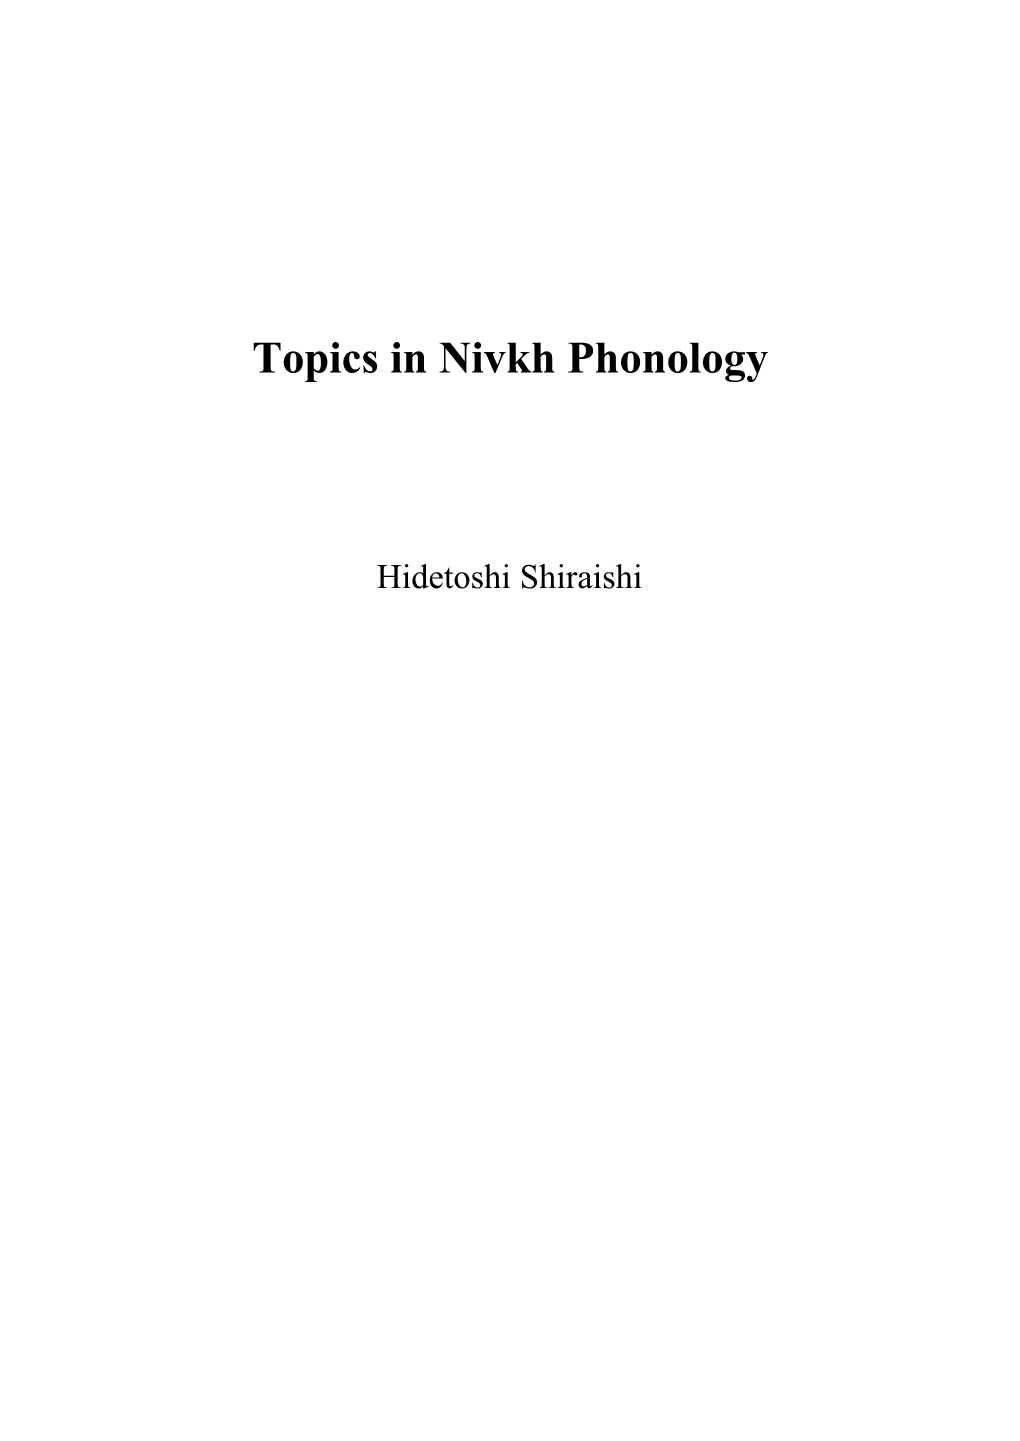 Topics in Nivkh Phonology